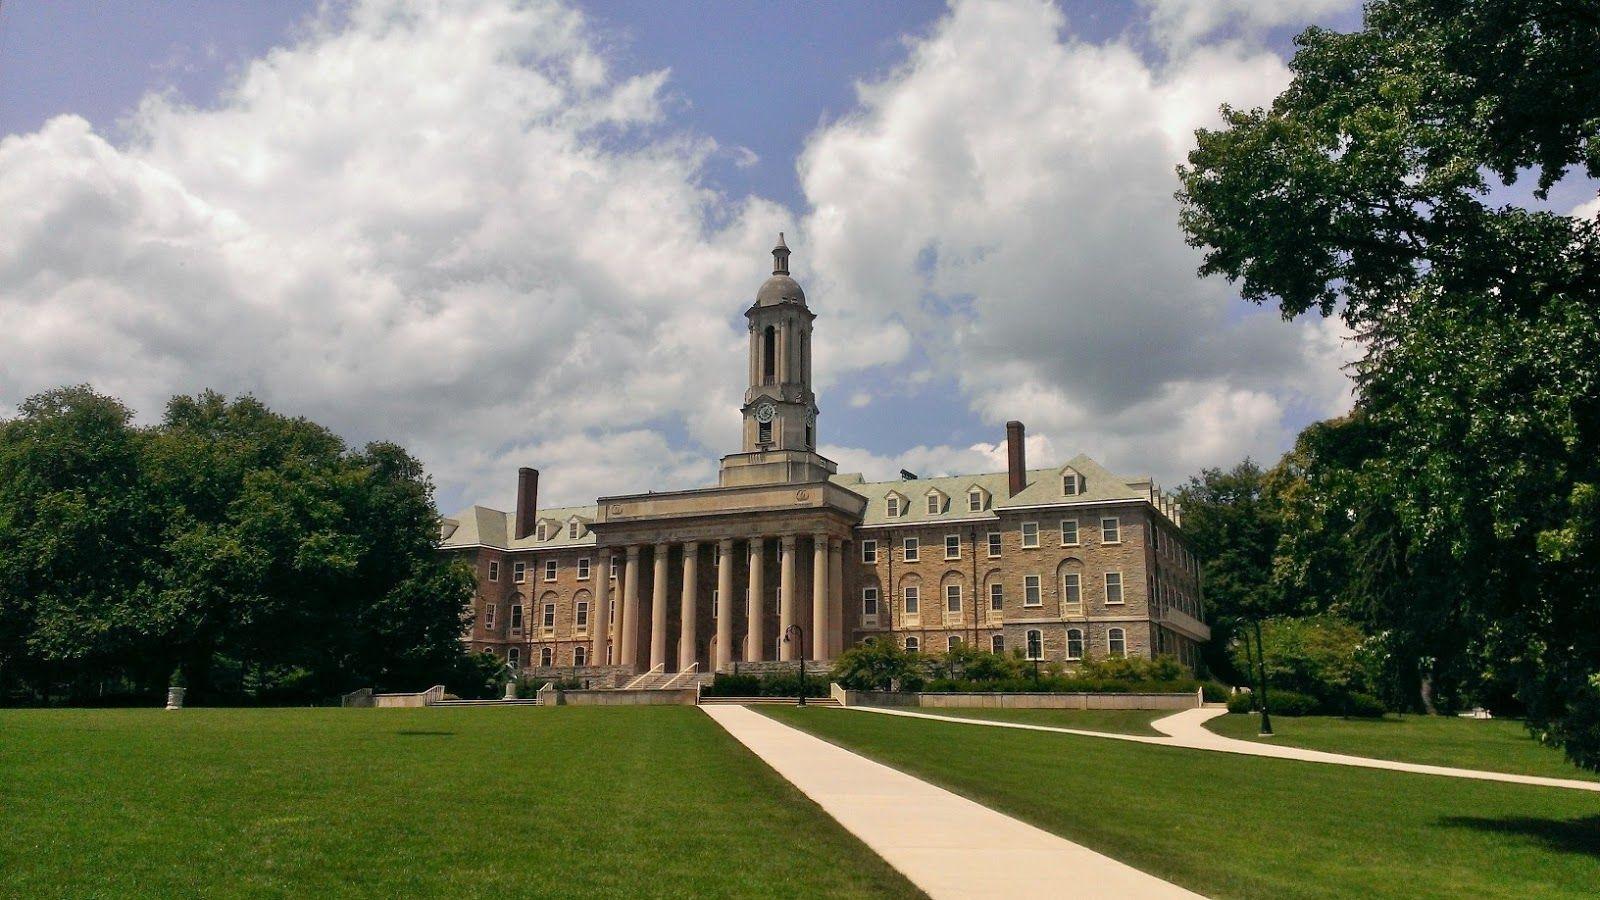 Cool Full HD Wallpaper's Collection: Old Main Penn State Wallpaper